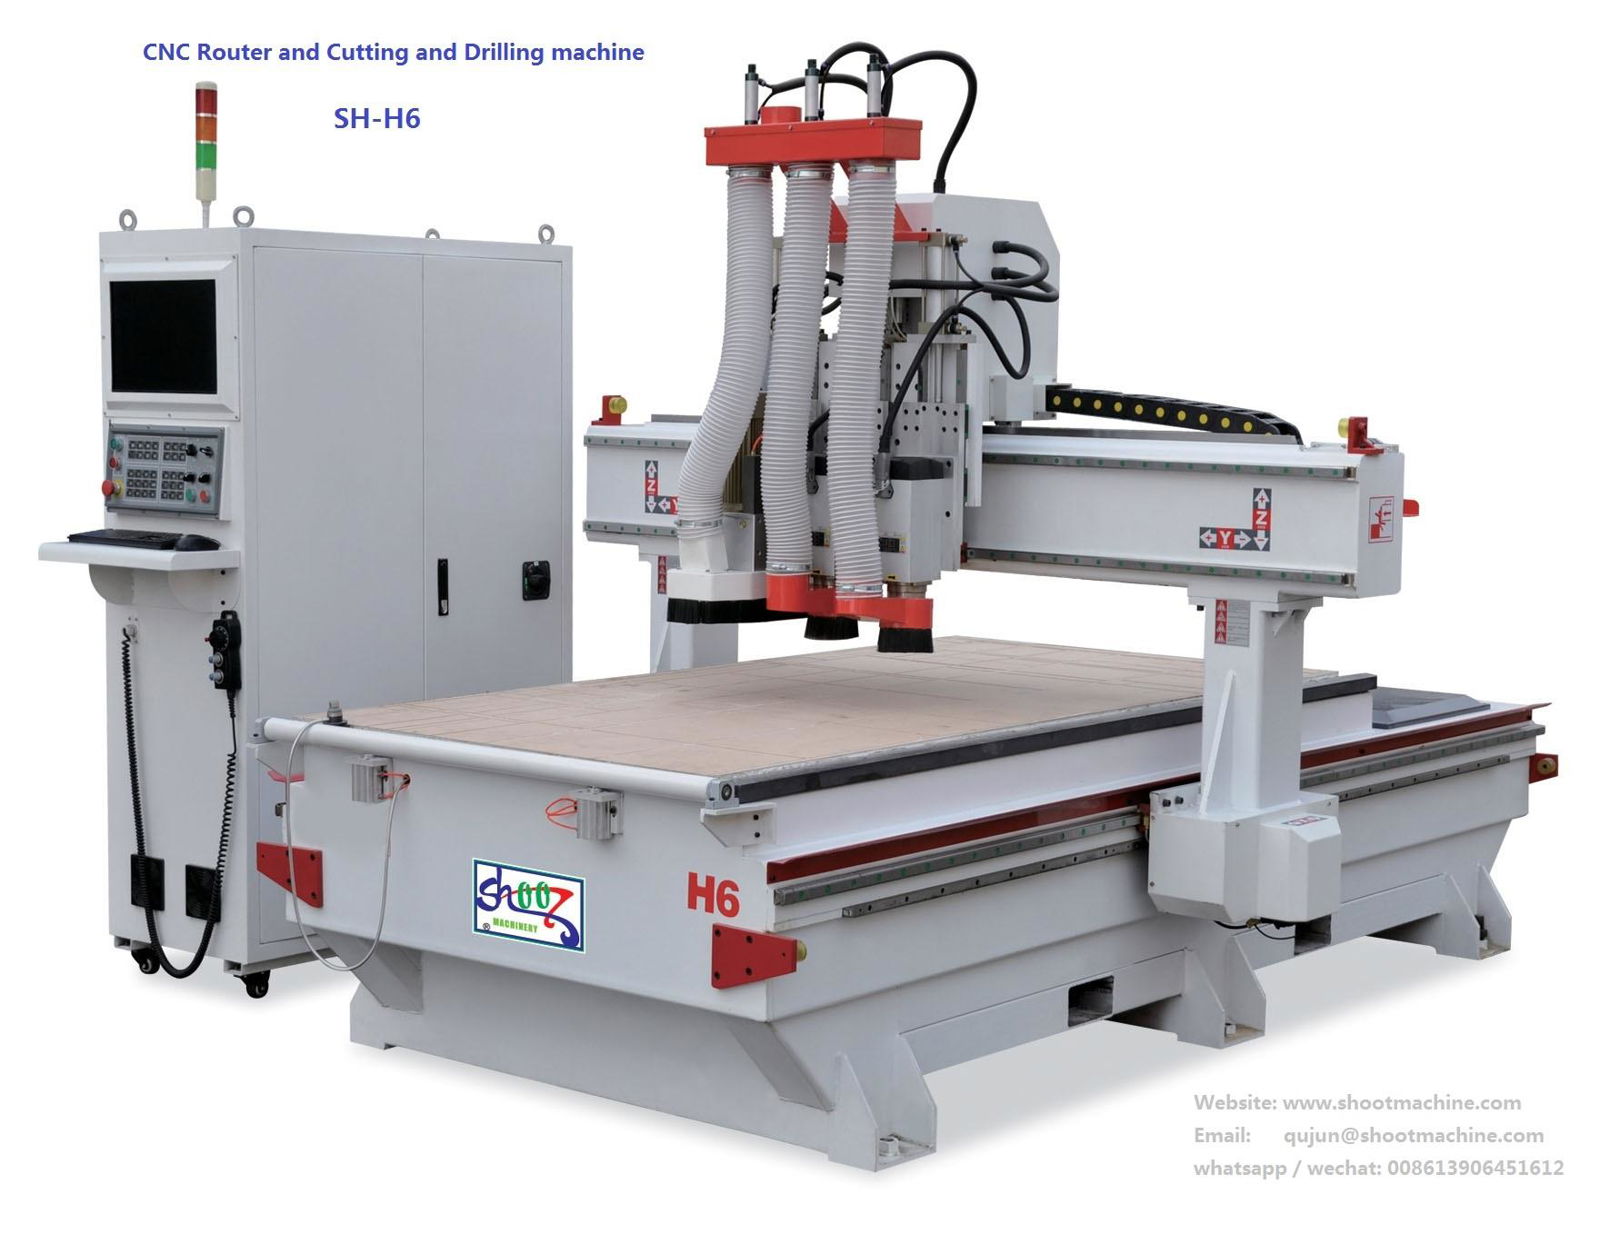 CNC Cutting and Router and Drilling Machine, SH-H6